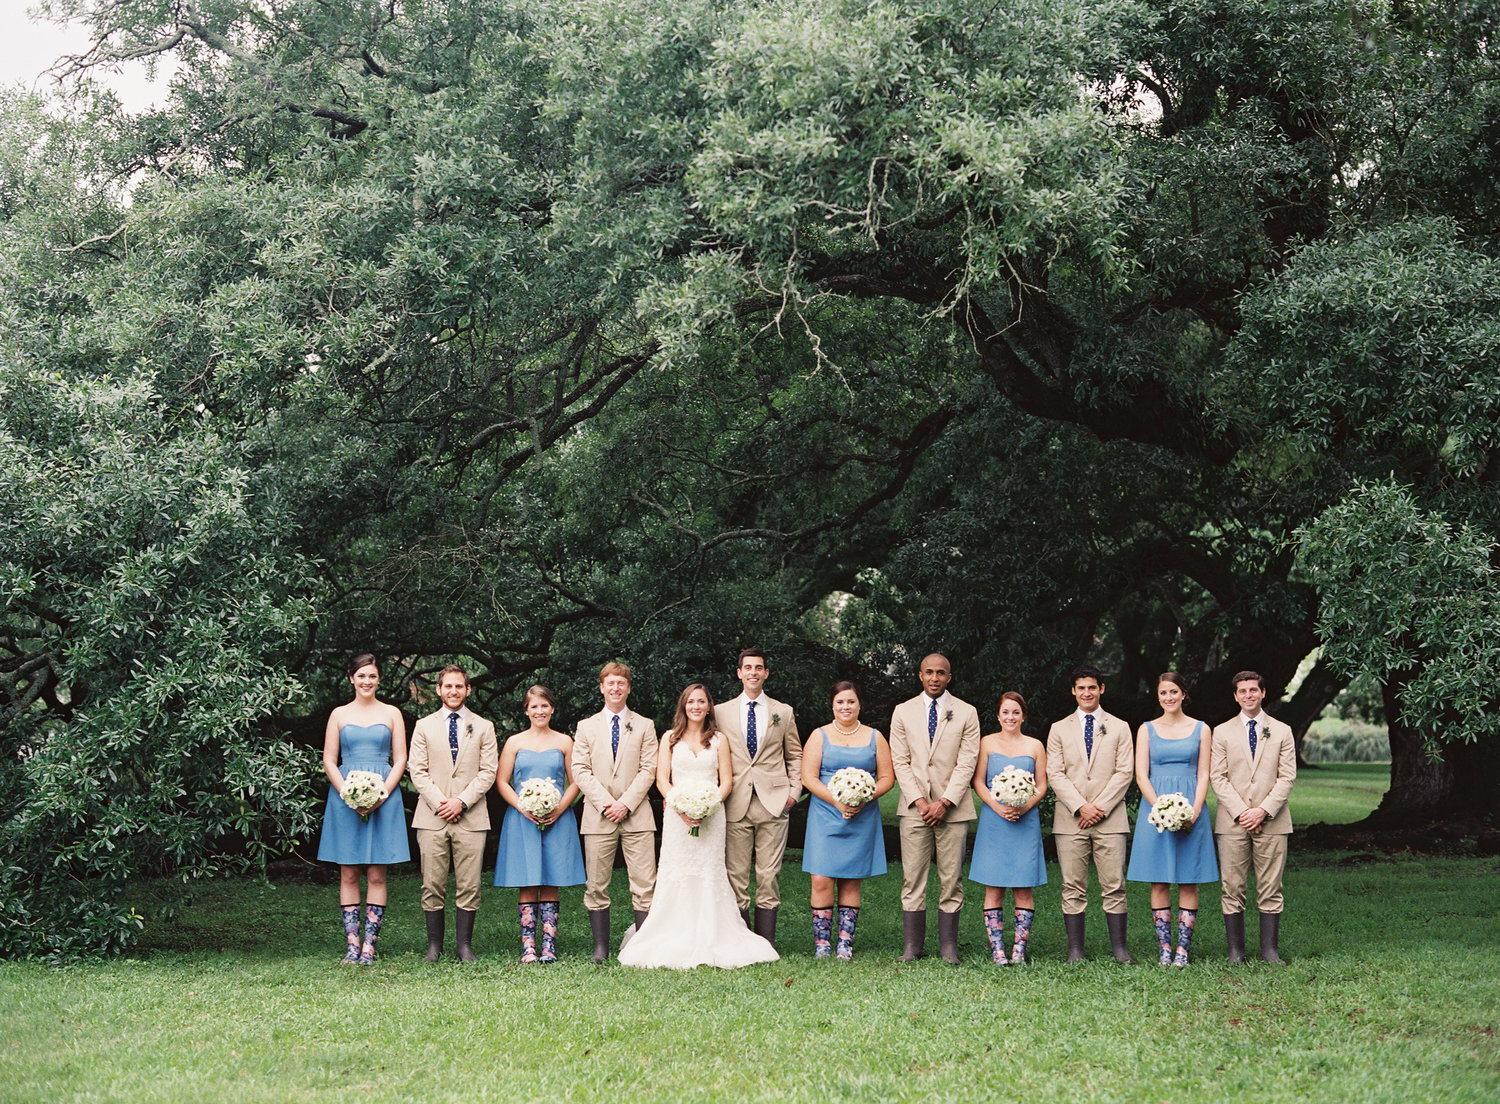 Bride, groom, bridesmaids, groomsmen all lined up in their rain-boots on a rainy wedding day in front of oak trees 